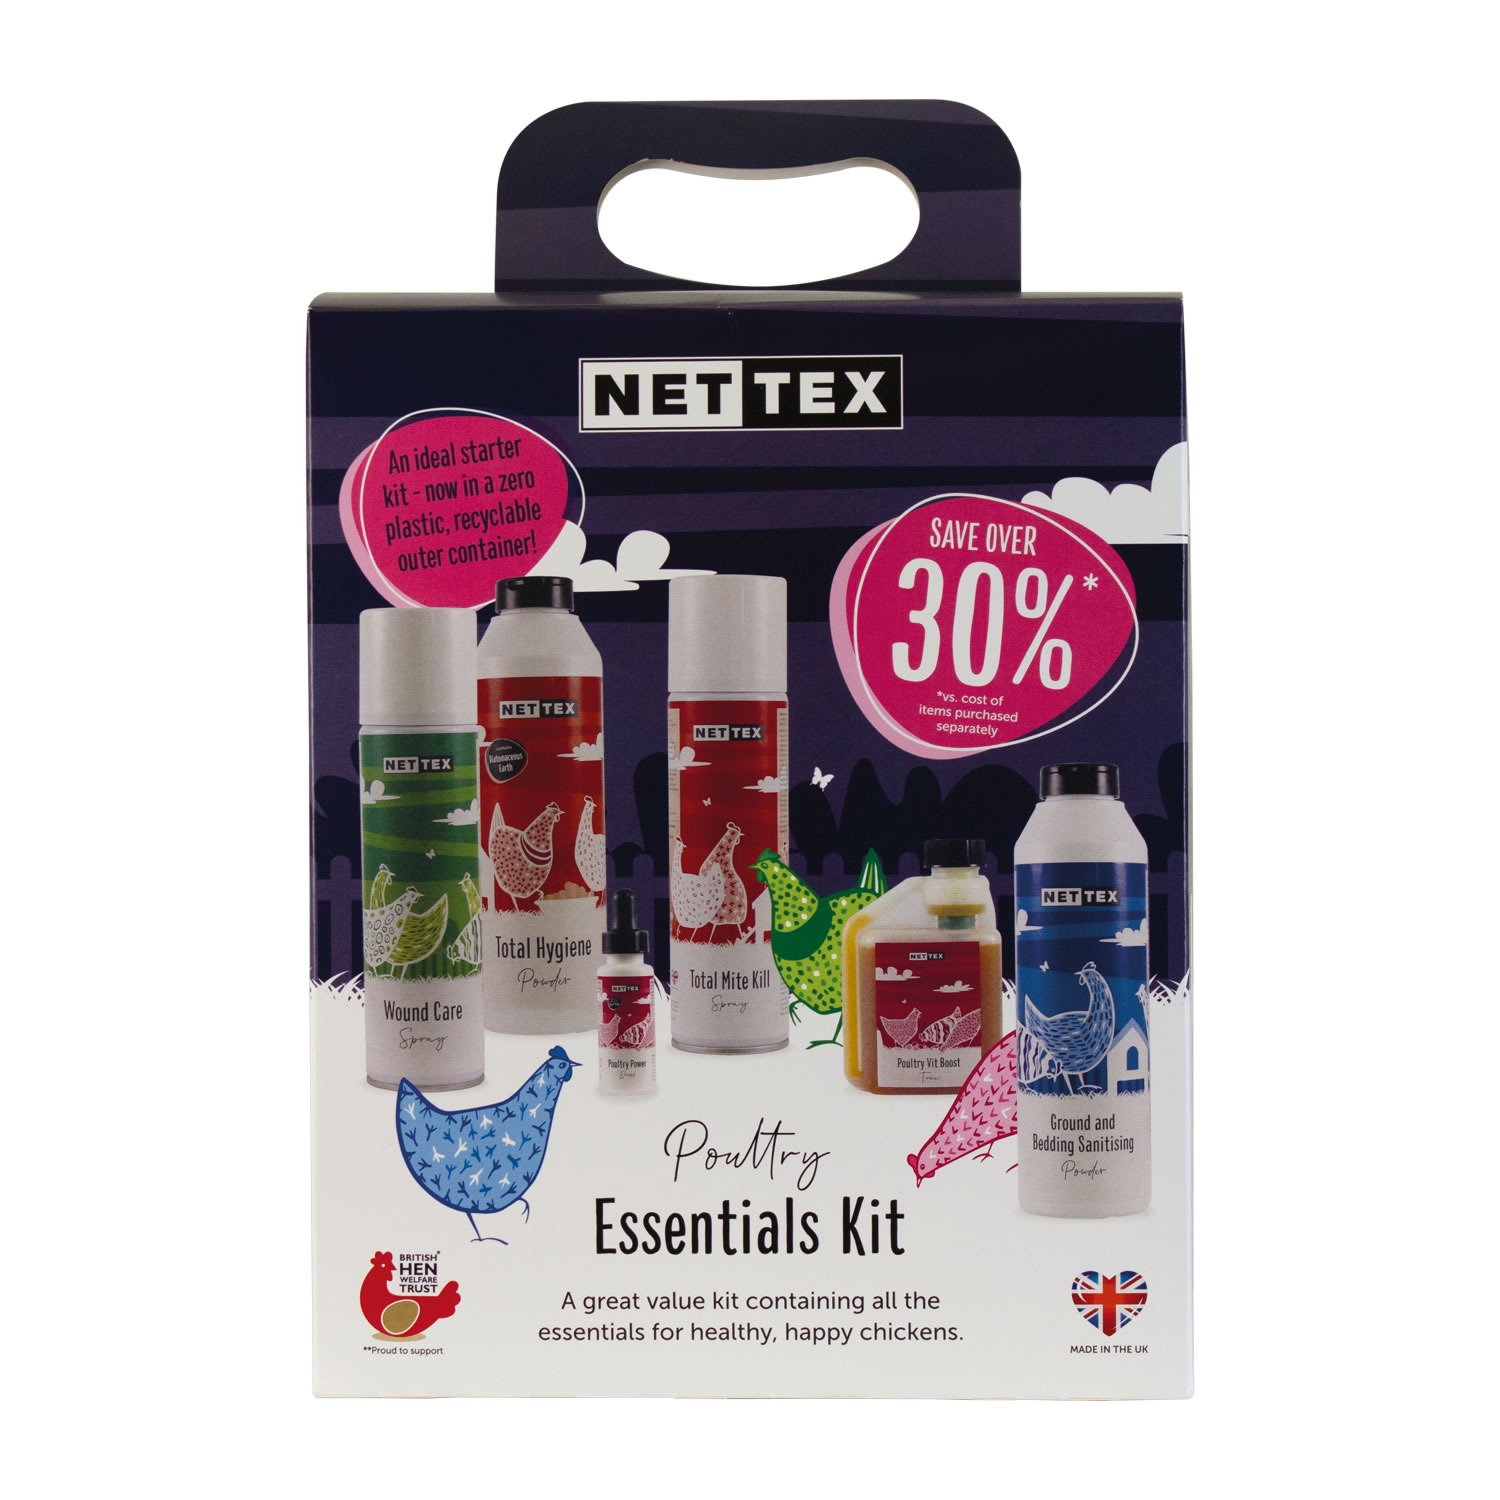 NETTEX POULTRY ESSENTIALS KIT 2 PACK